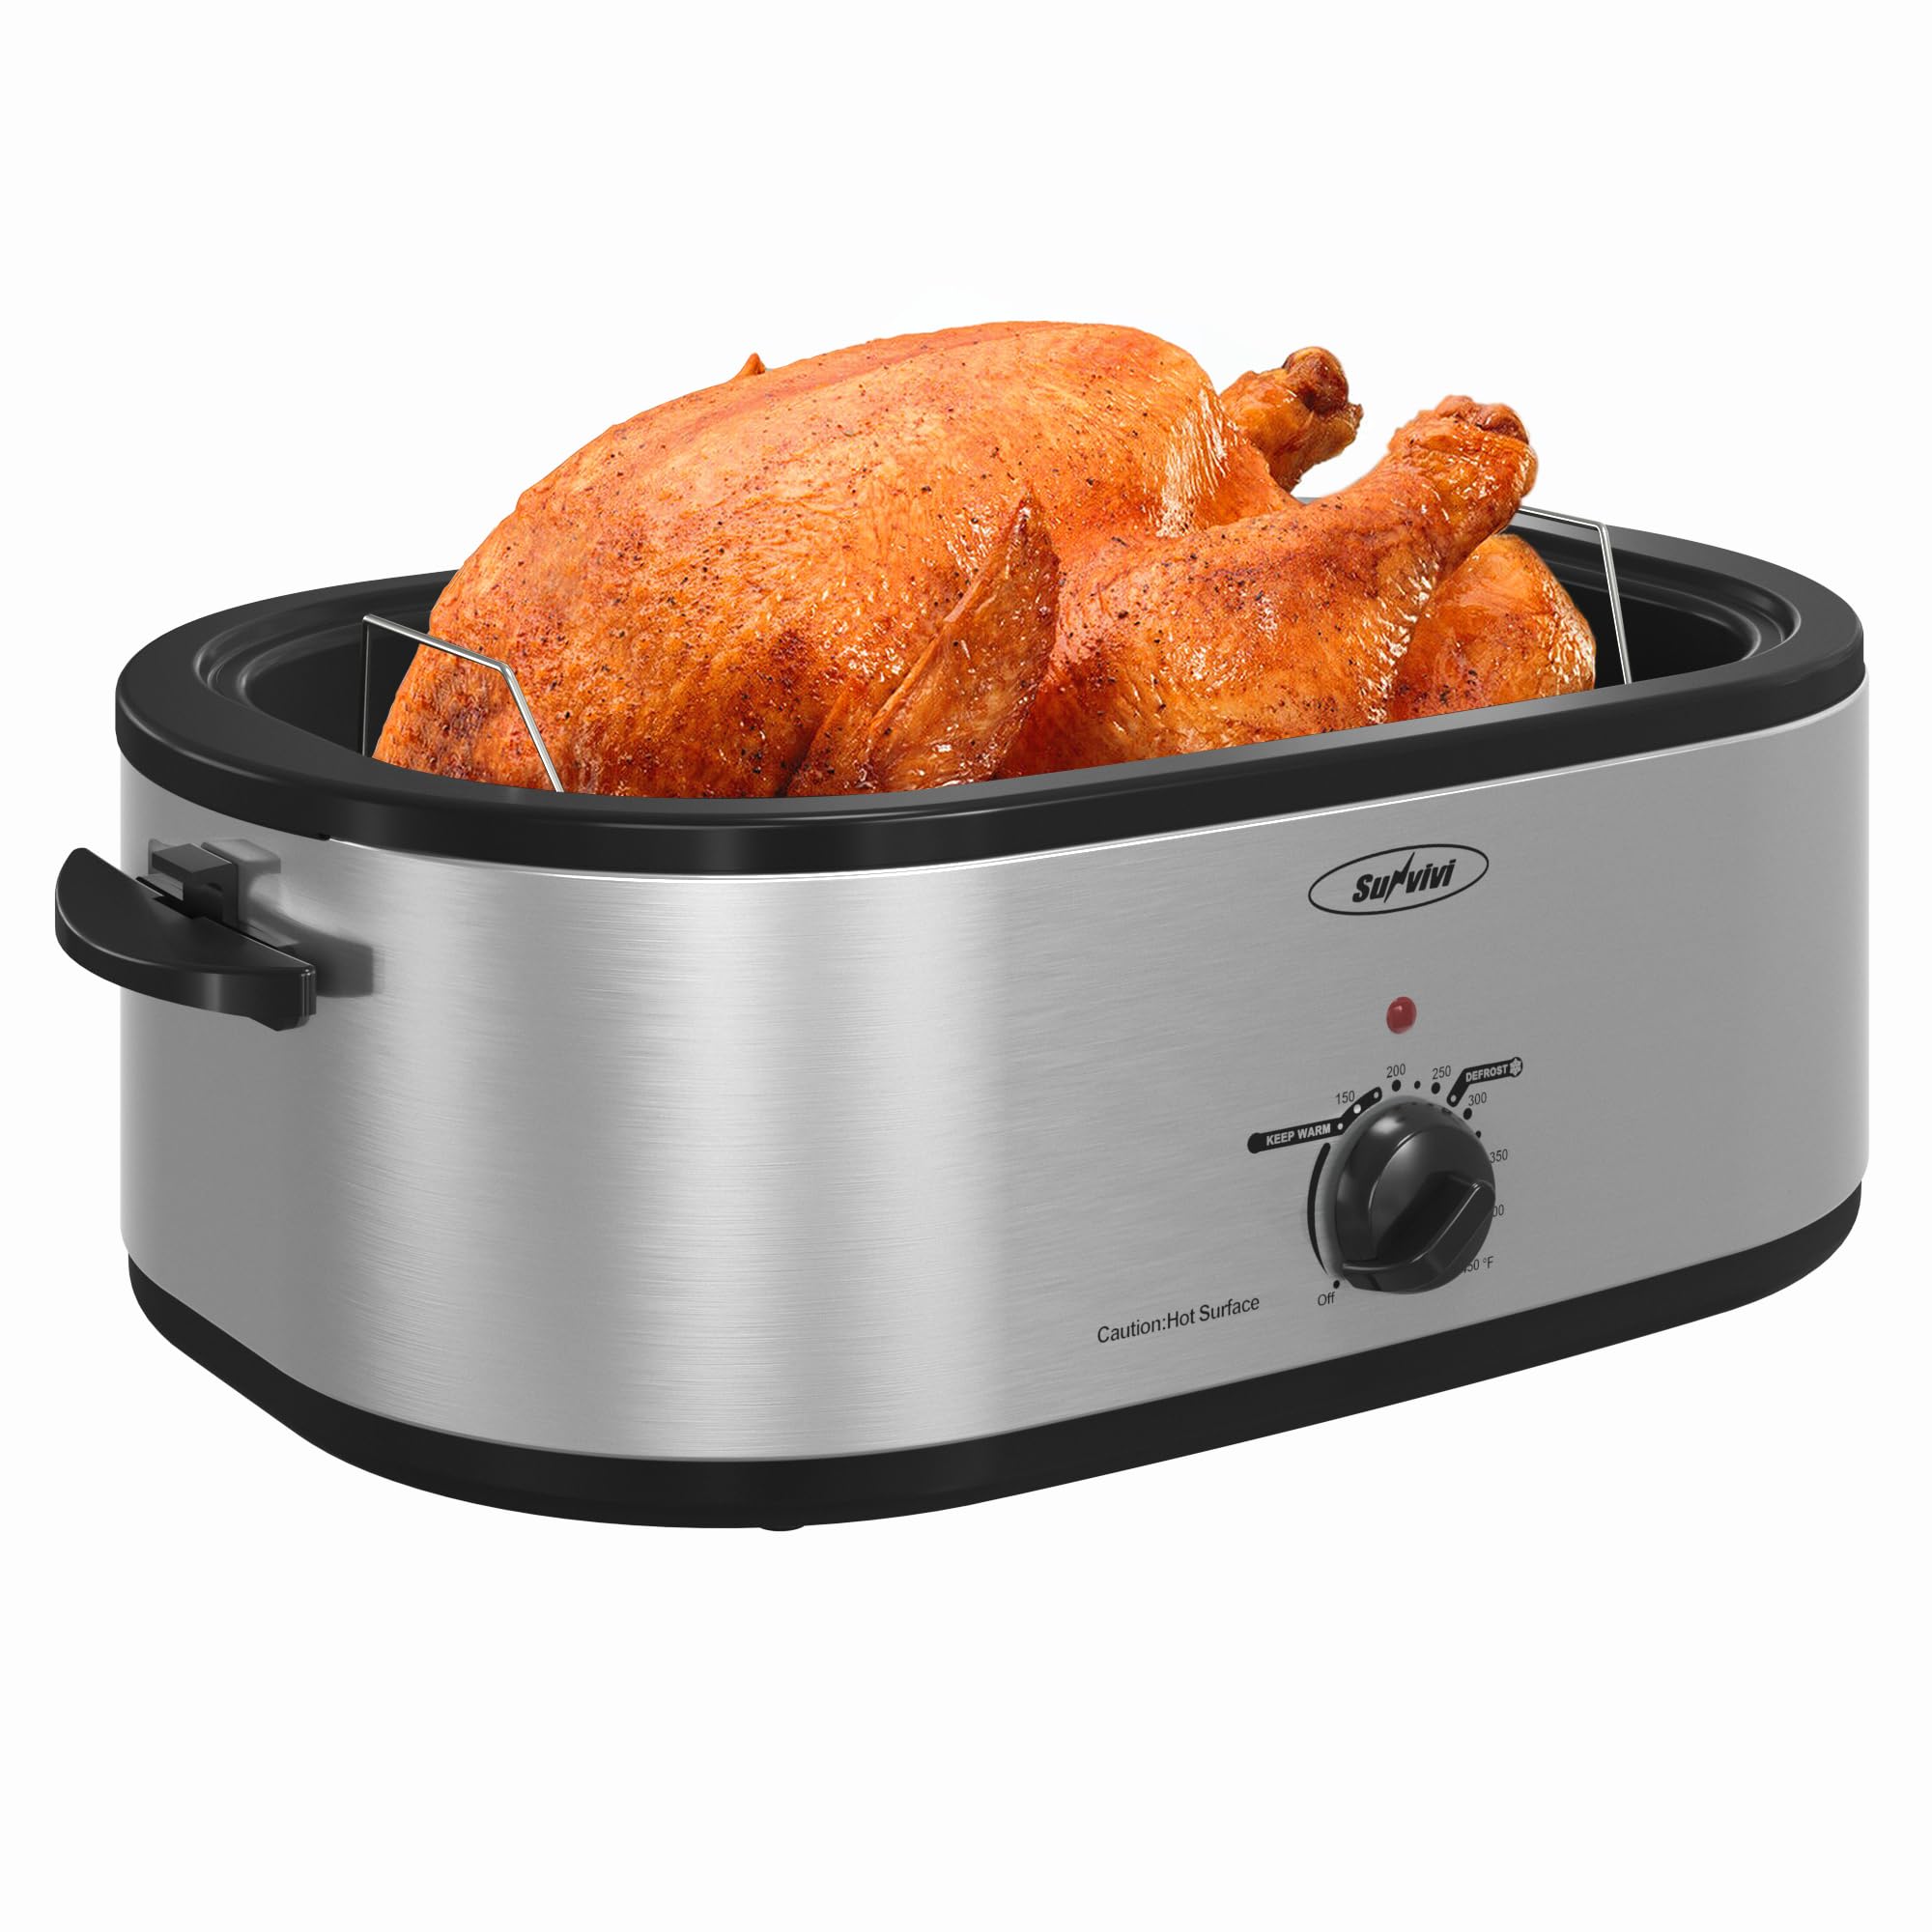 Sunvivi Electric Roaster, 18 Quart Roasting Oven with Self-Basting Lid Removable Pan, Turkey Roaster Oven with 150 to 450F Temperature Control Cool-Touch Handles, Silver